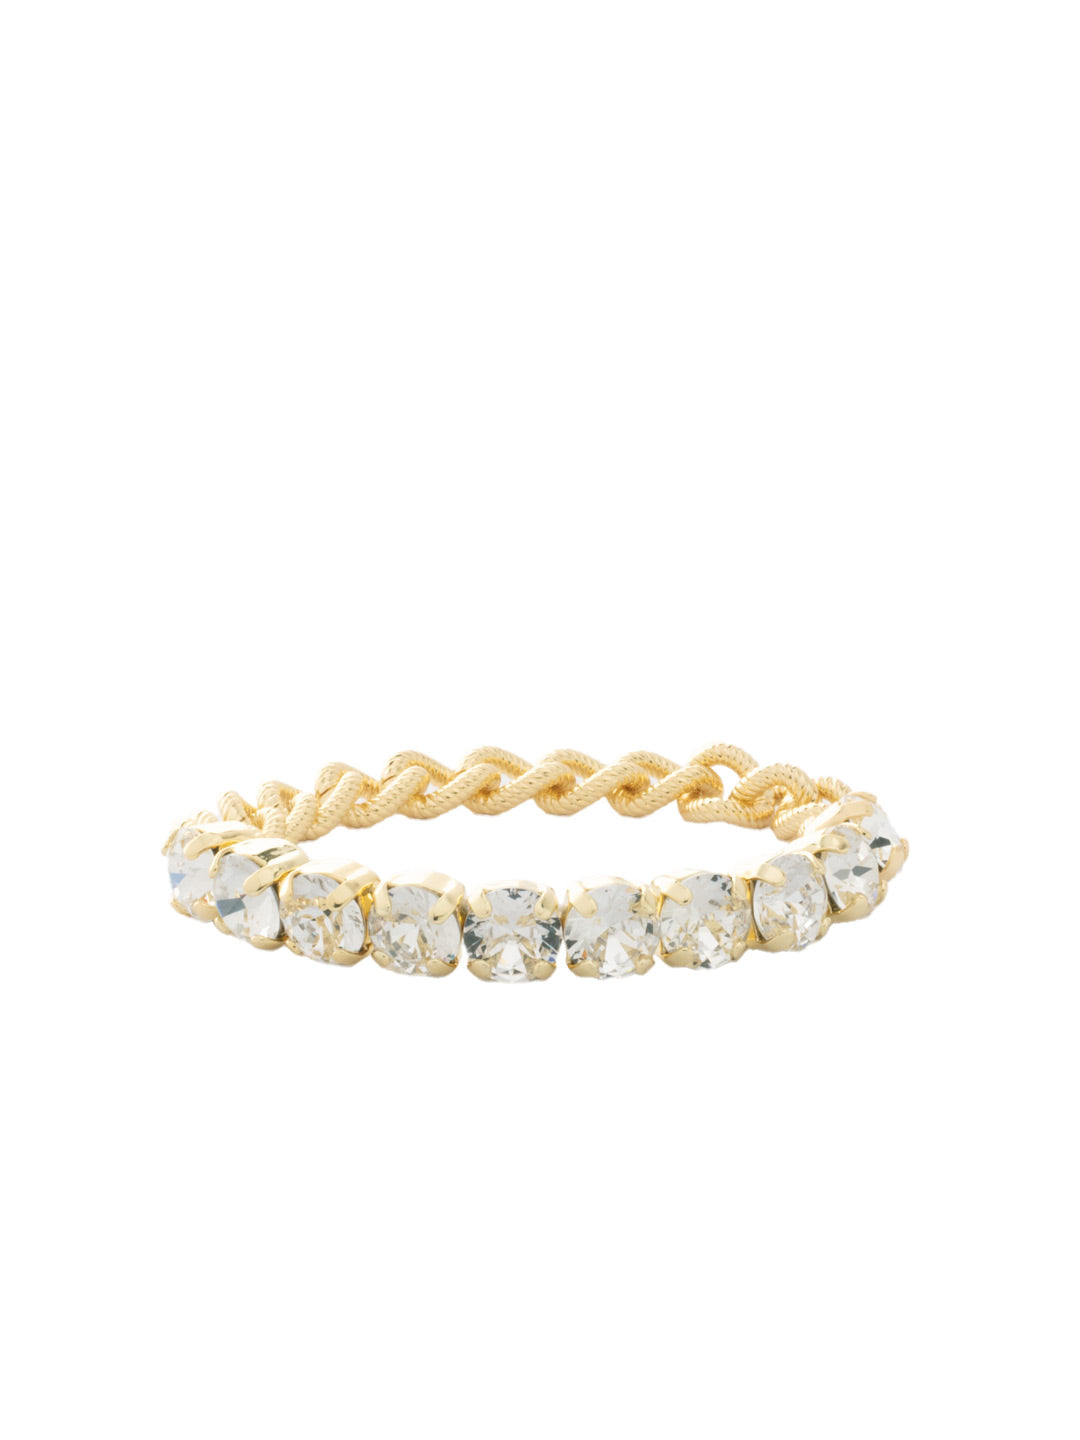 Product Image: Crystal and Chain Stretch Bracelet